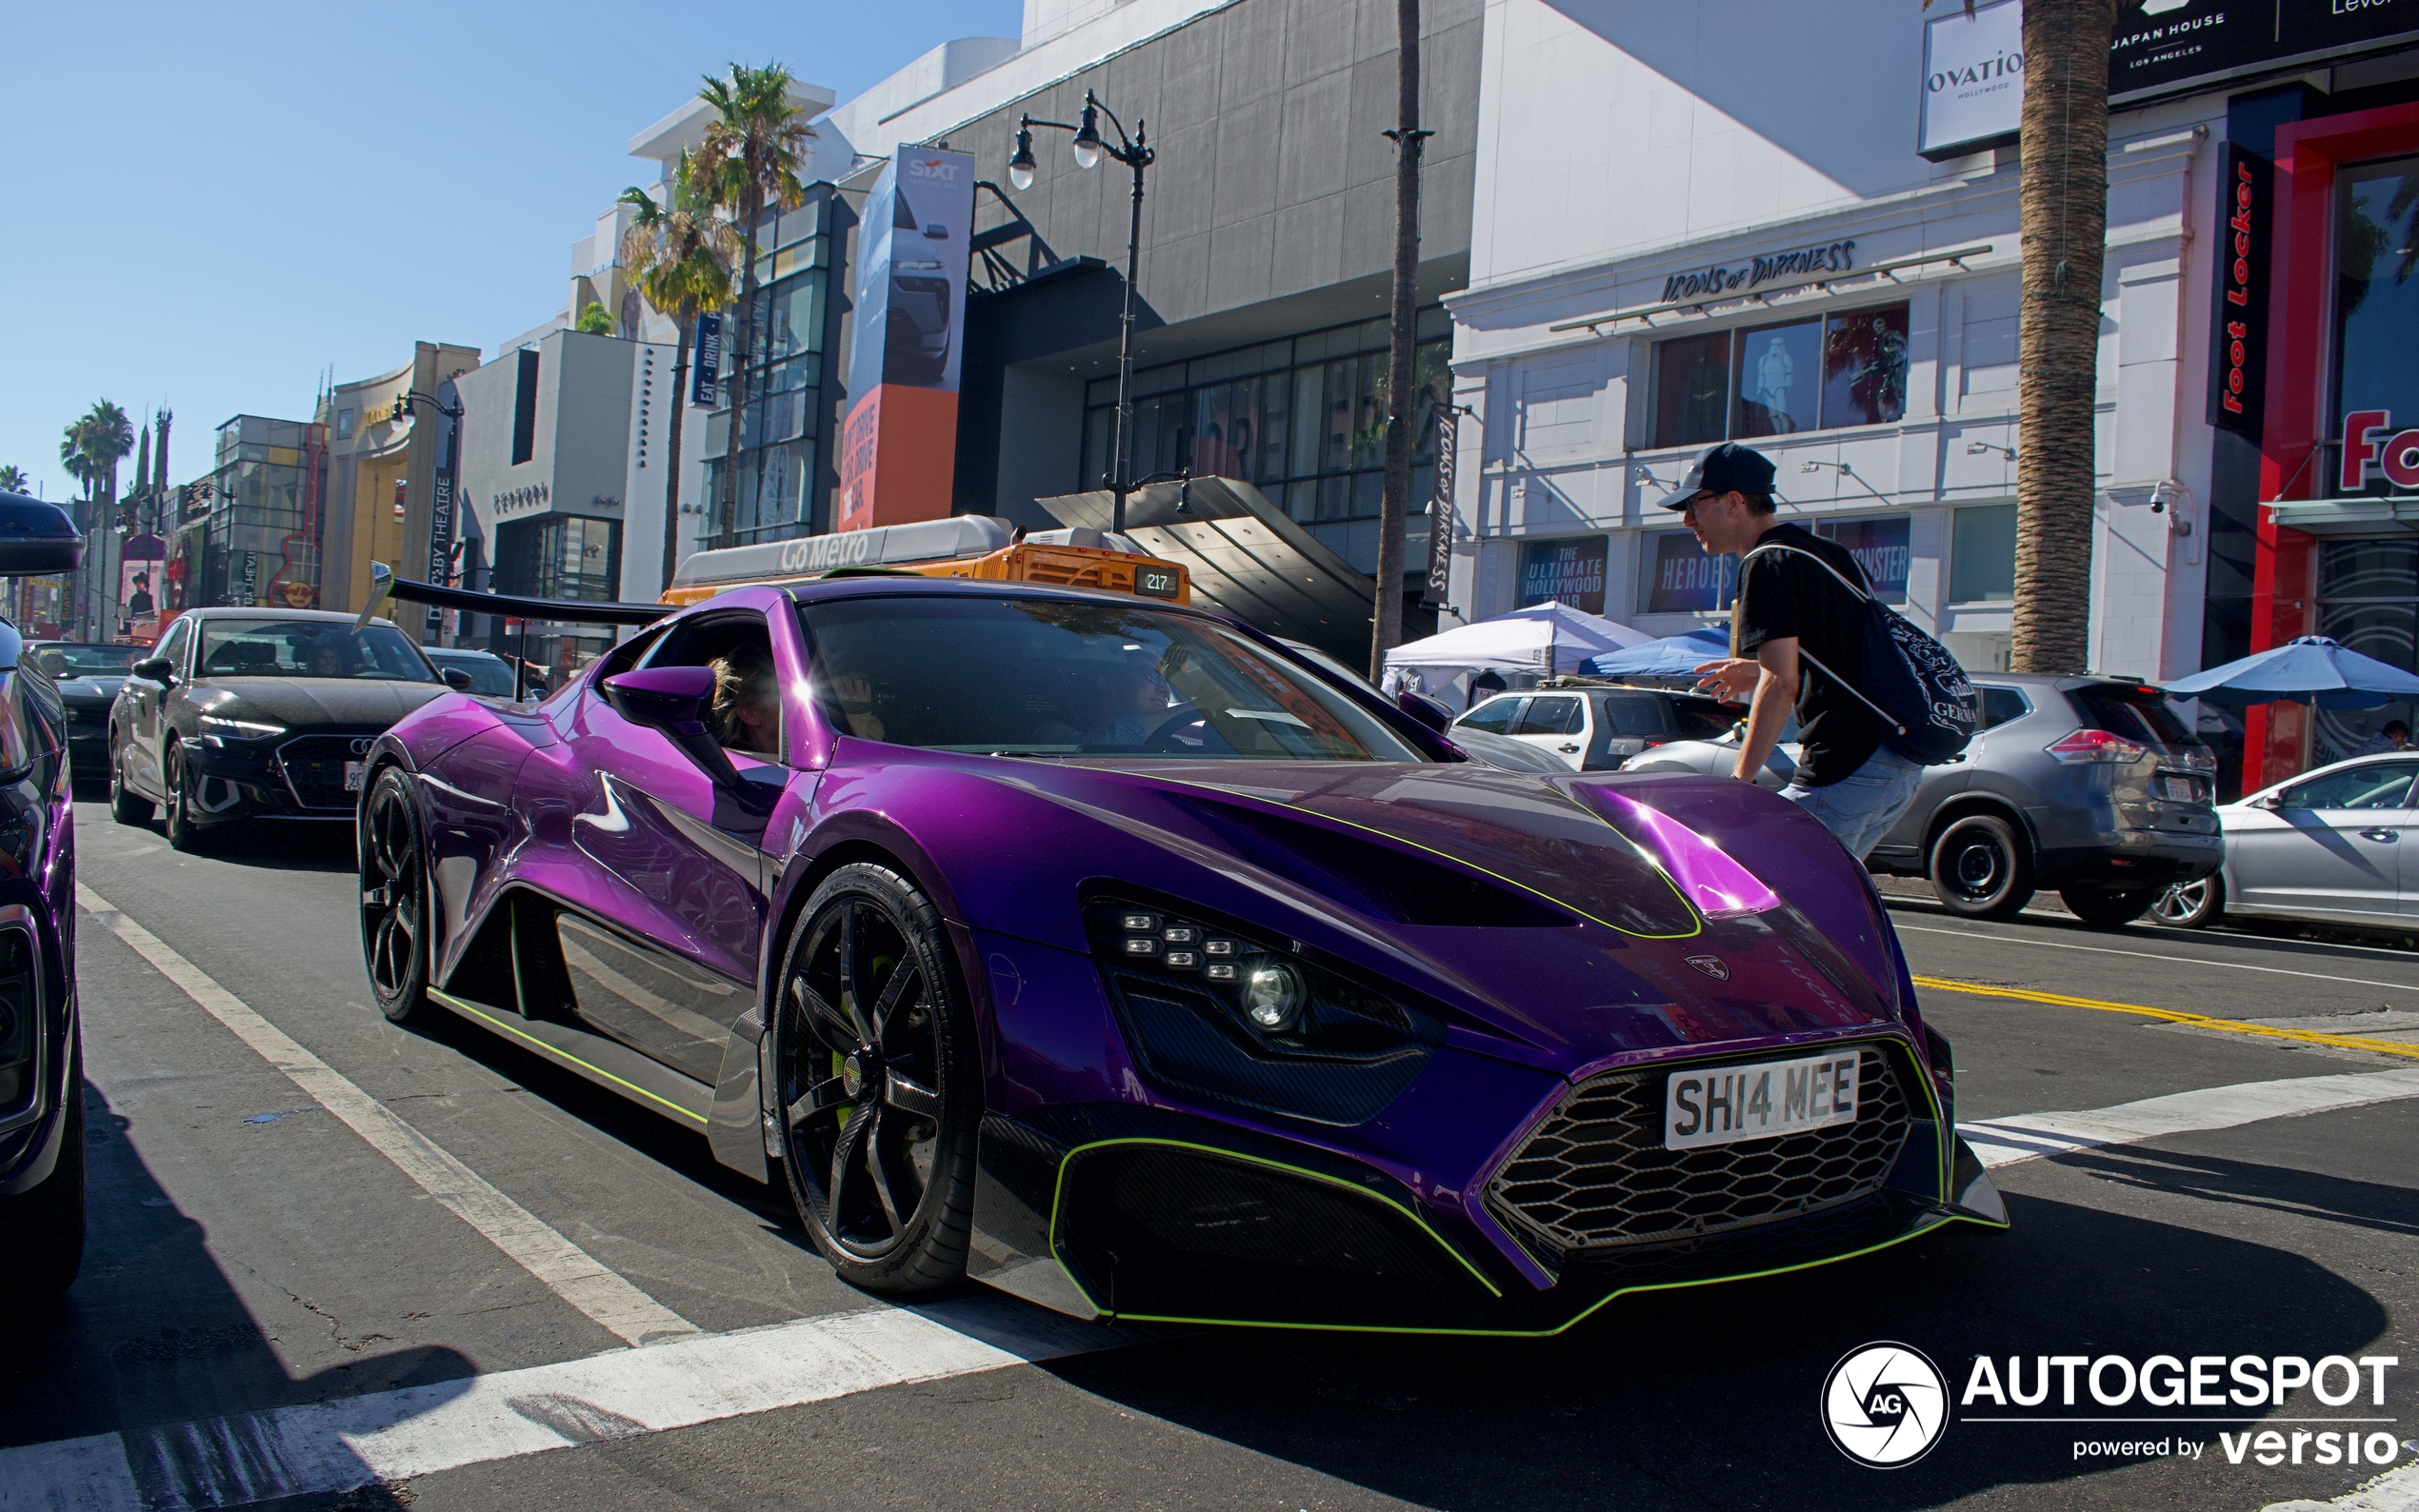 Shmee150 shows up in Hollywood, including his beautiful Zenvo